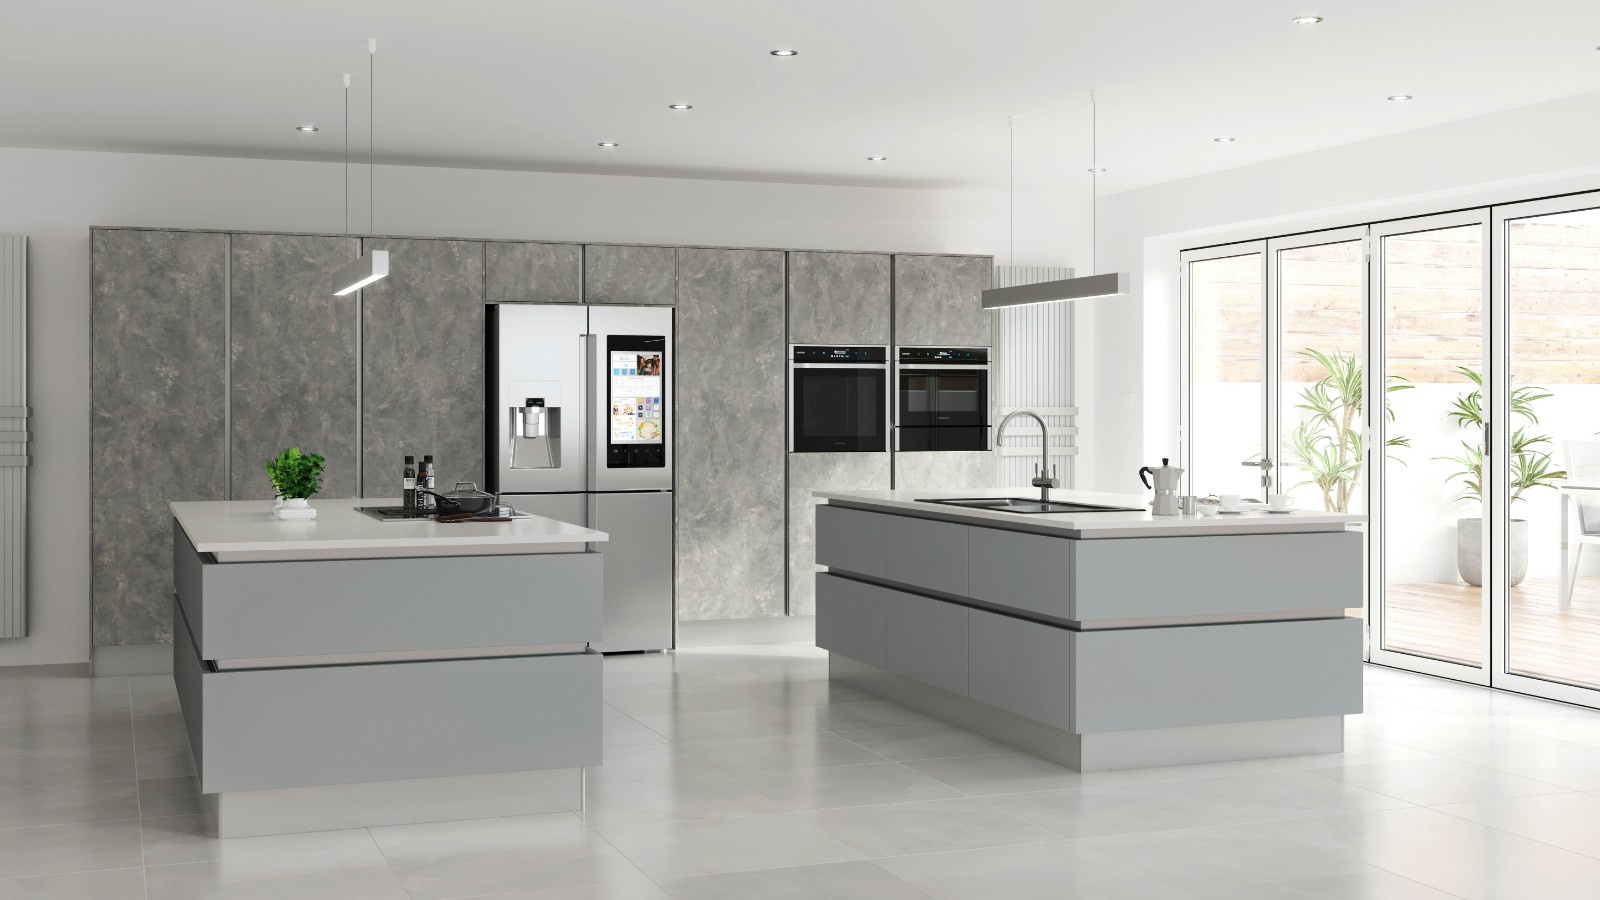 Crown Imperial | Zeluso grey finishes - Kitchens and Bathrooms News